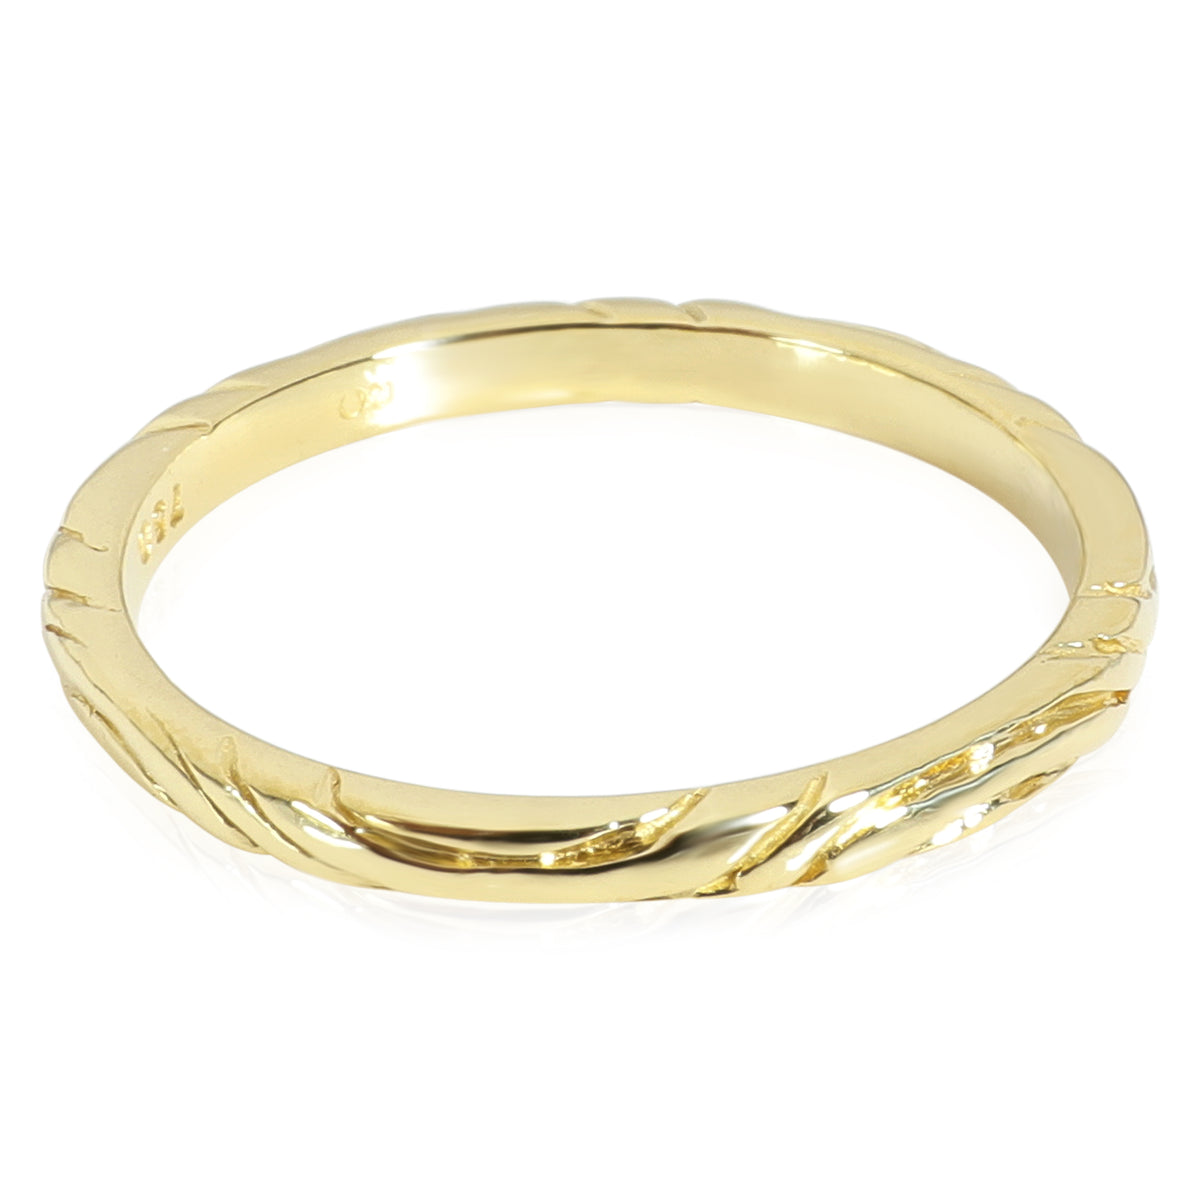 Hidalgo Wave Band in 18k Yellow Gold